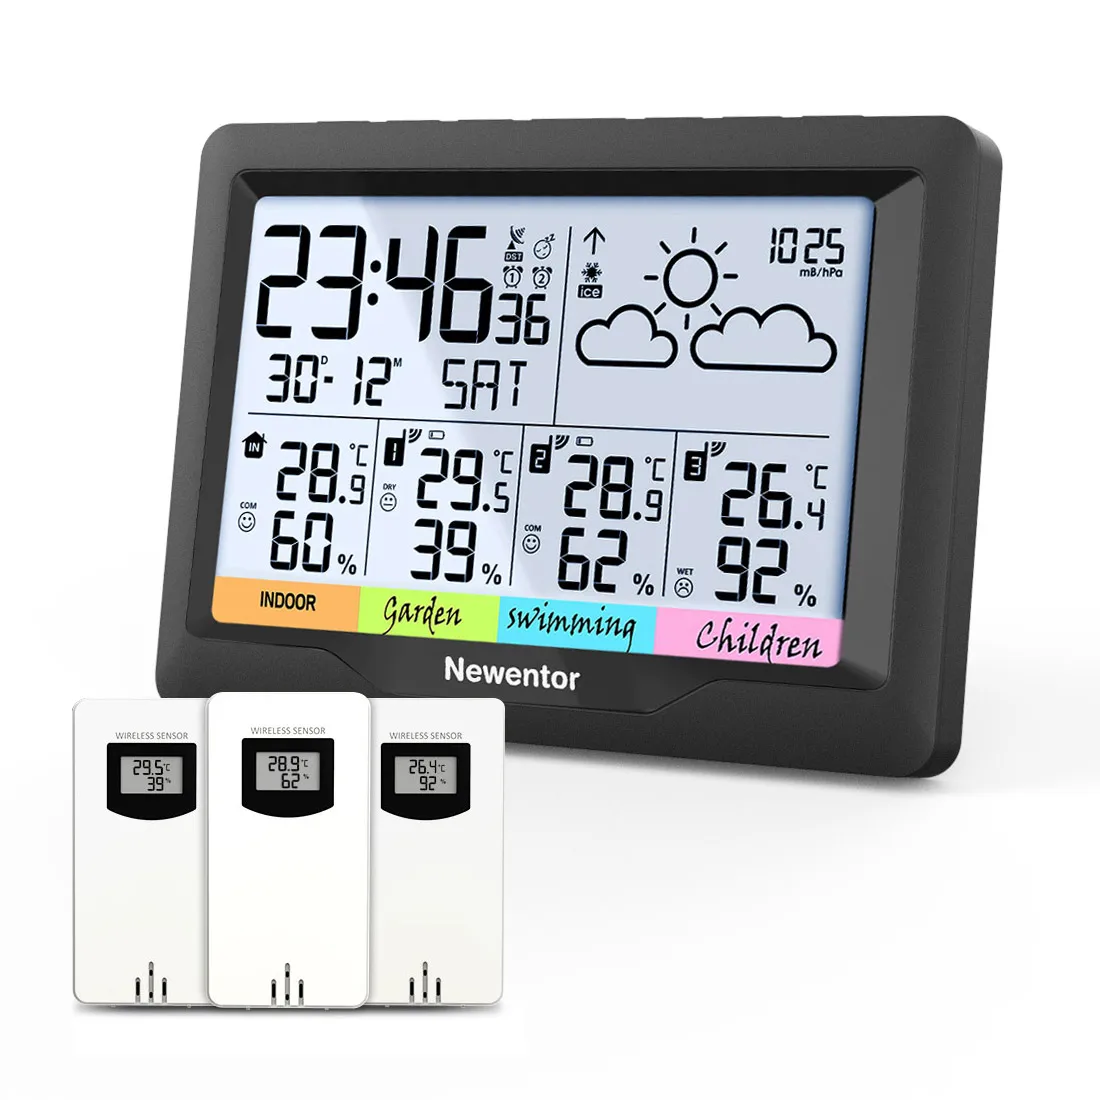 Weather Station Wireless Digital Indoor Outdoor Weather Forecast Hygrometer  Humidity Temperature Meter Barometer with Backlight - AliExpress